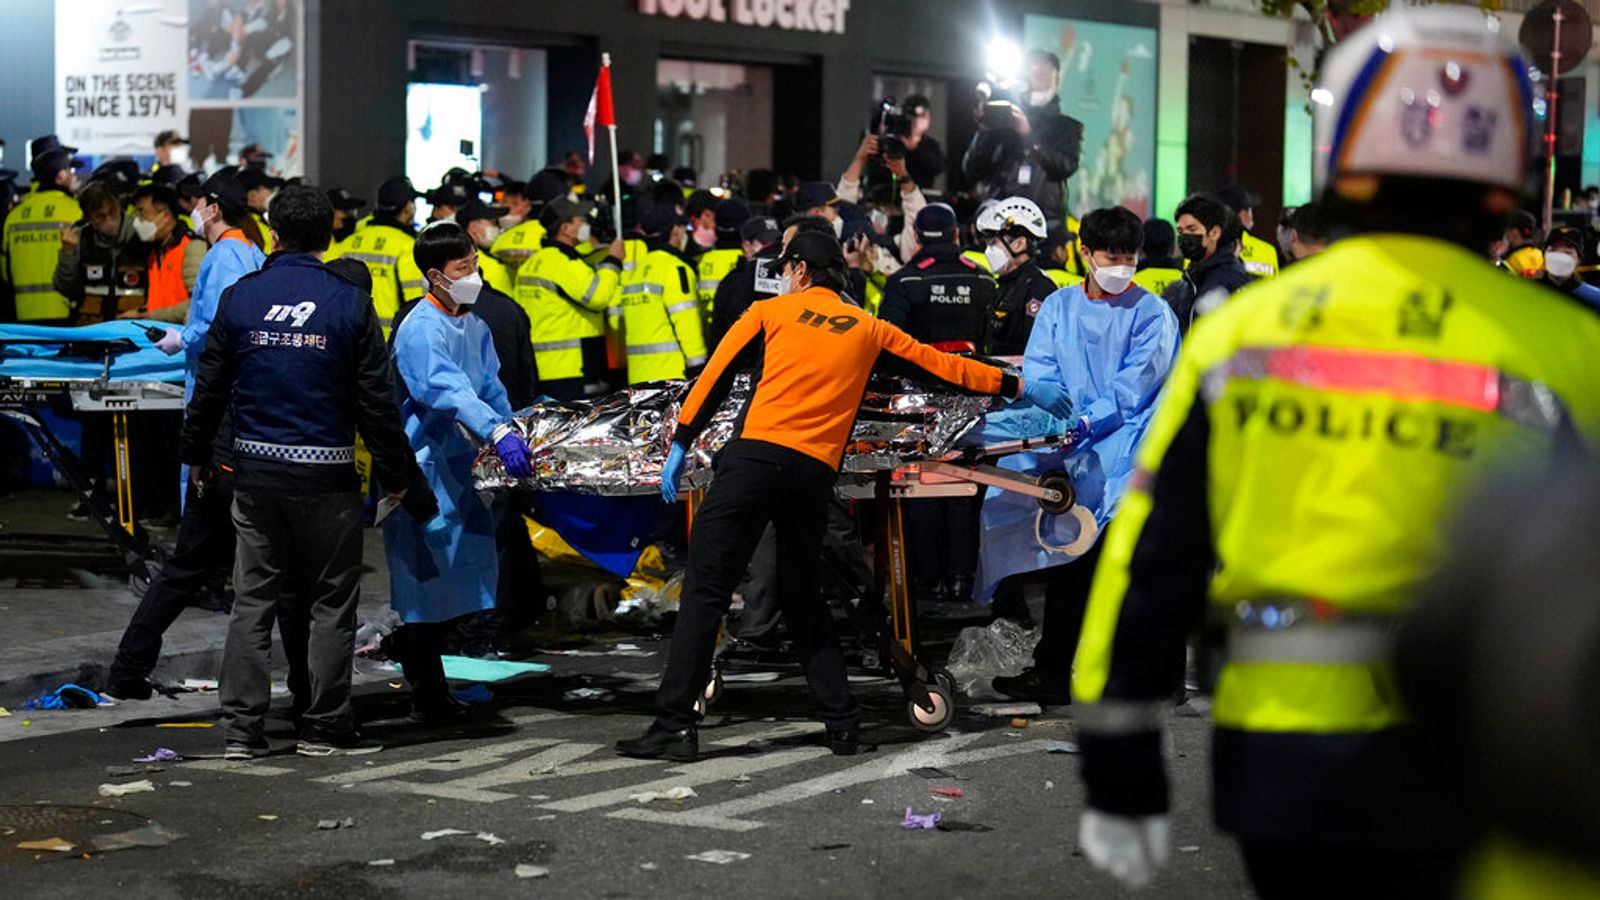 South Korea declares national period of mourning after Halloween crowd crush kills 153